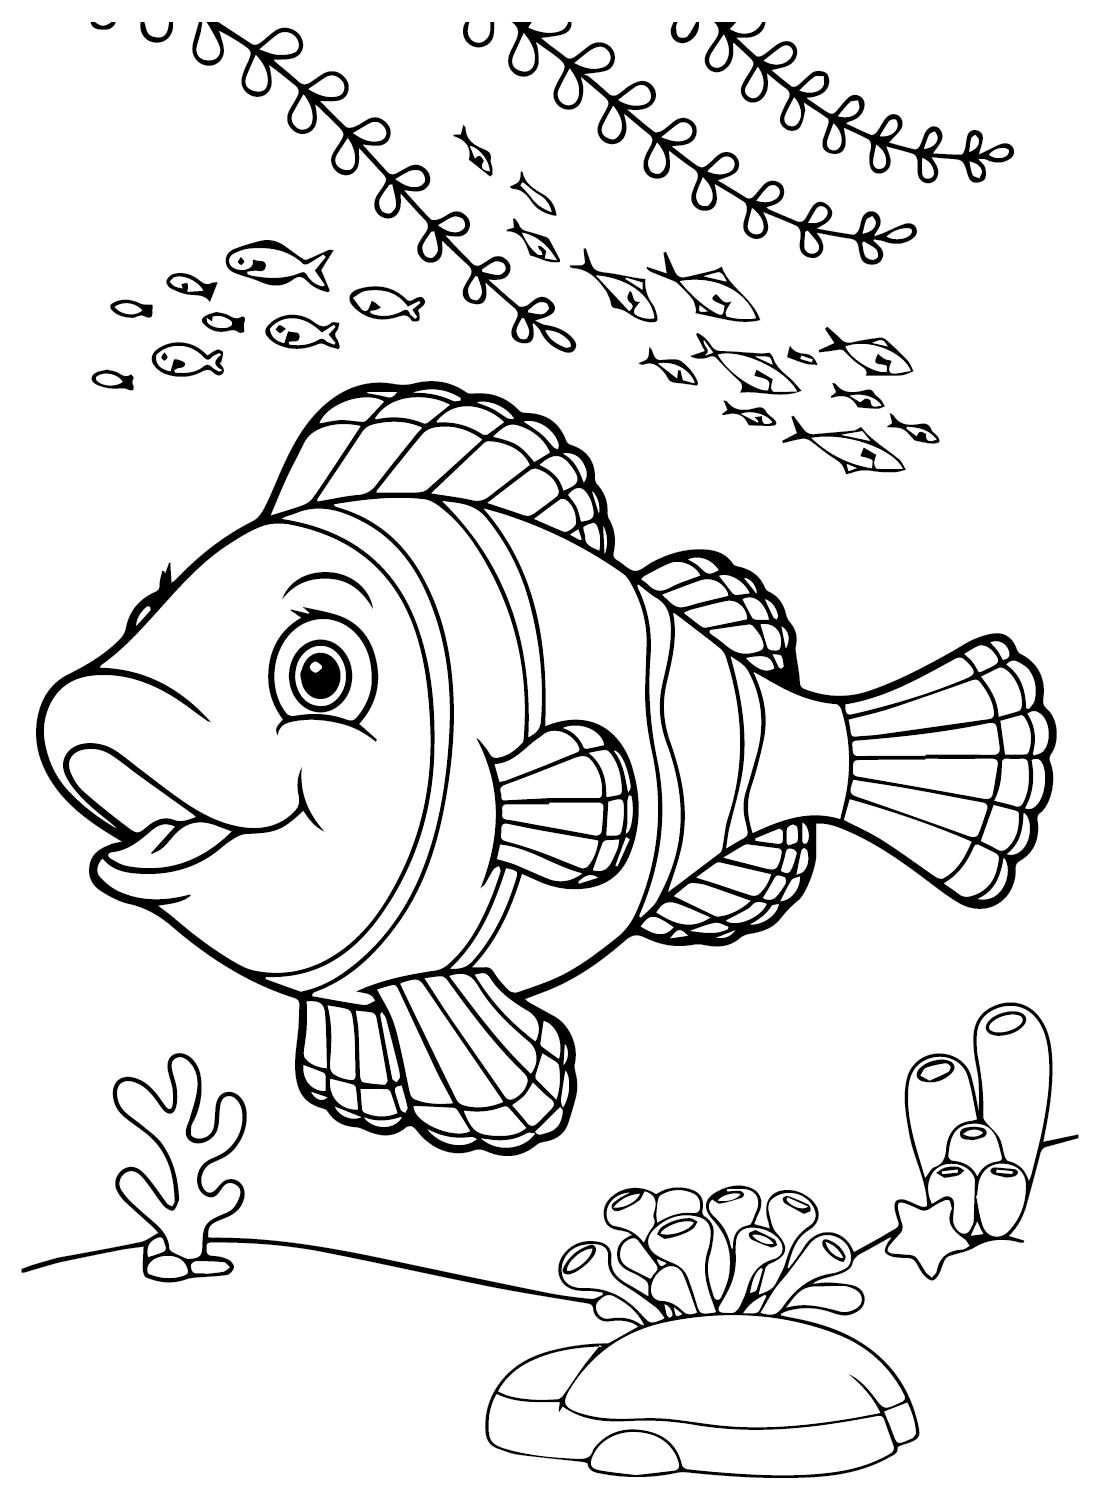 The Clownfish Coloring Pages